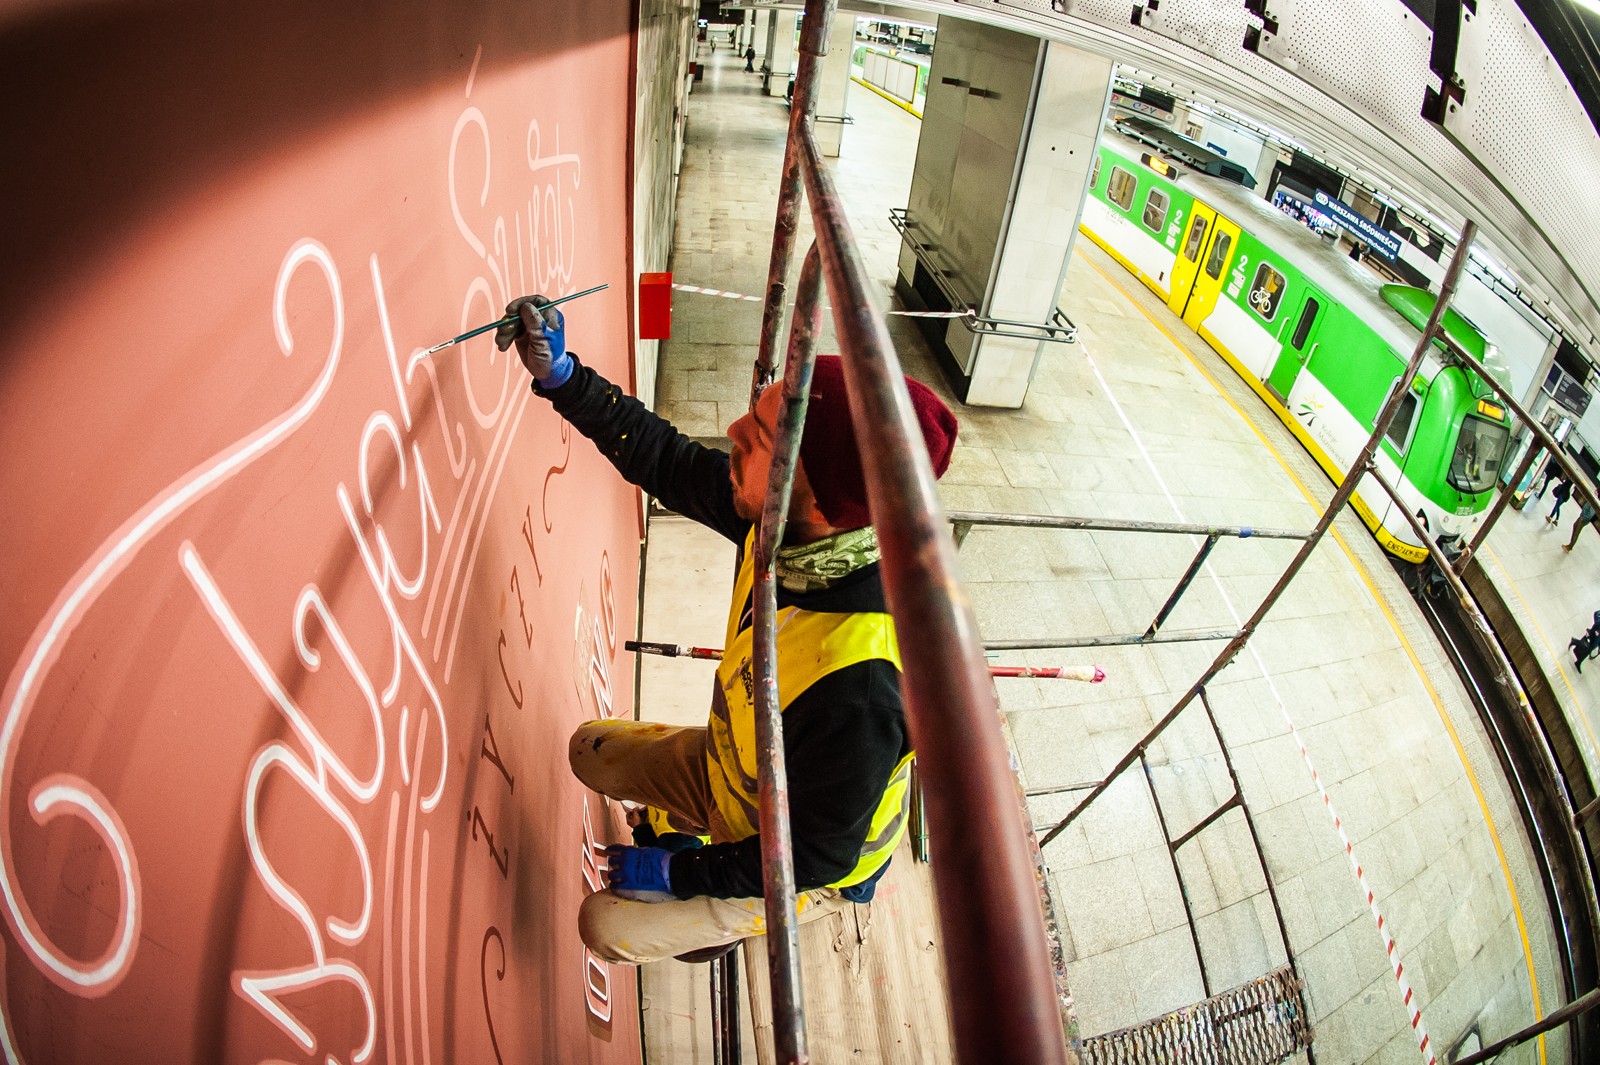 Artist painting a Christmas mural at PKP Srodmiescie train station in Warsaw | Christmas Card 2016 | Backstage